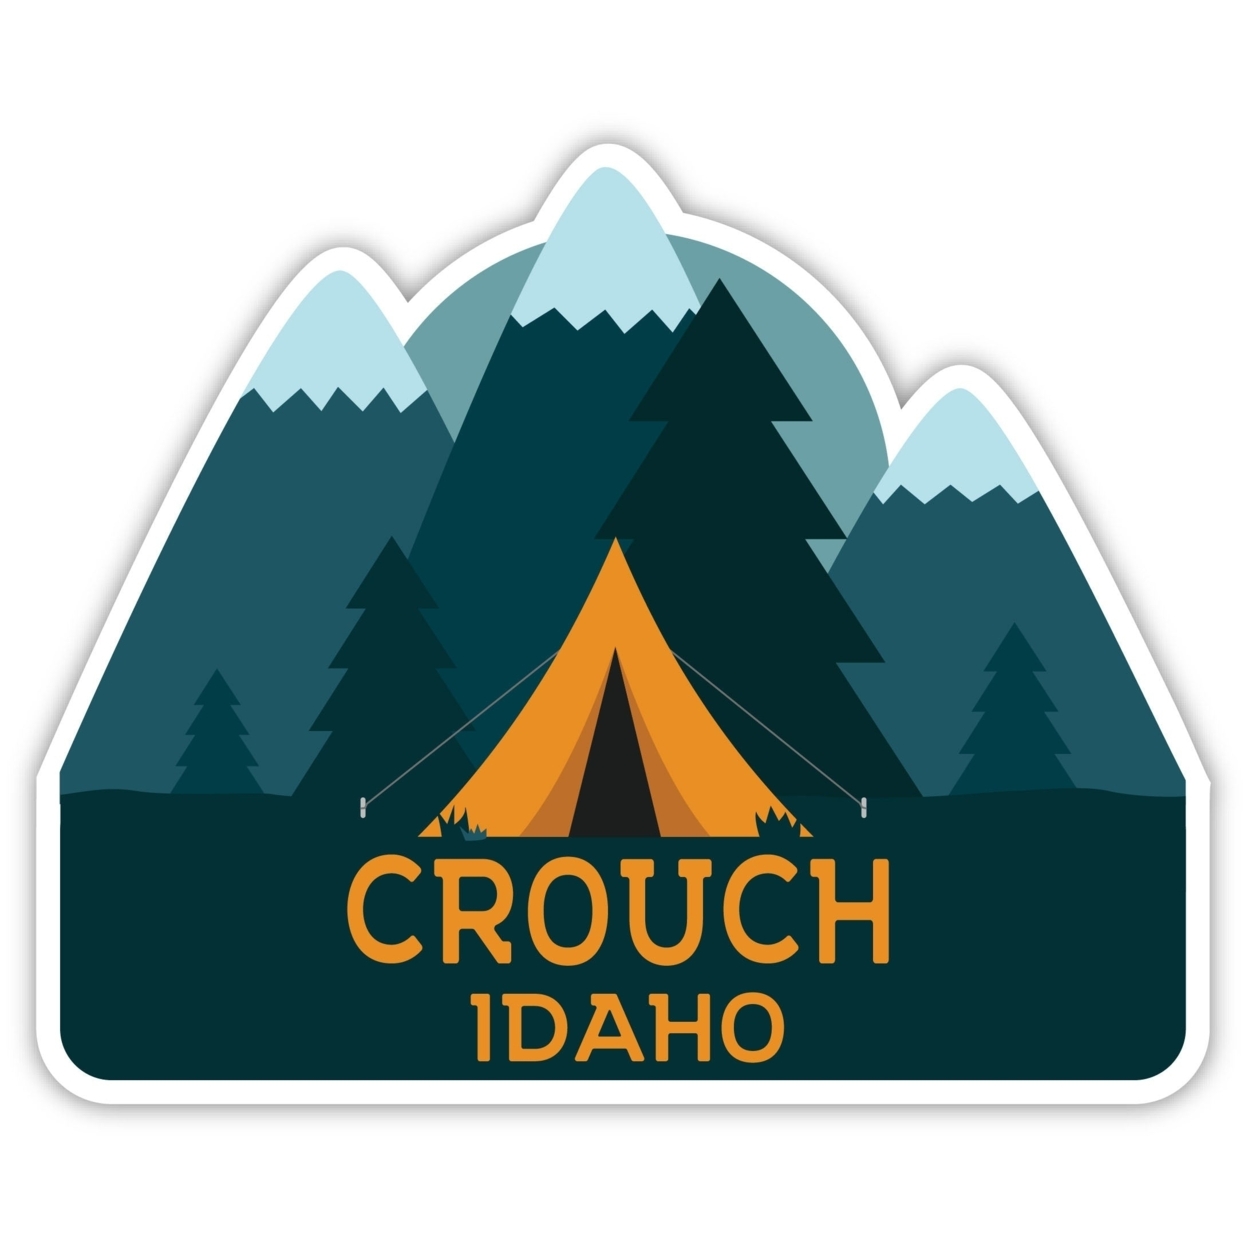 Crouch Idaho Souvenir Decorative Stickers (Choose Theme And Size) - Single Unit, 12-Inch, Tent